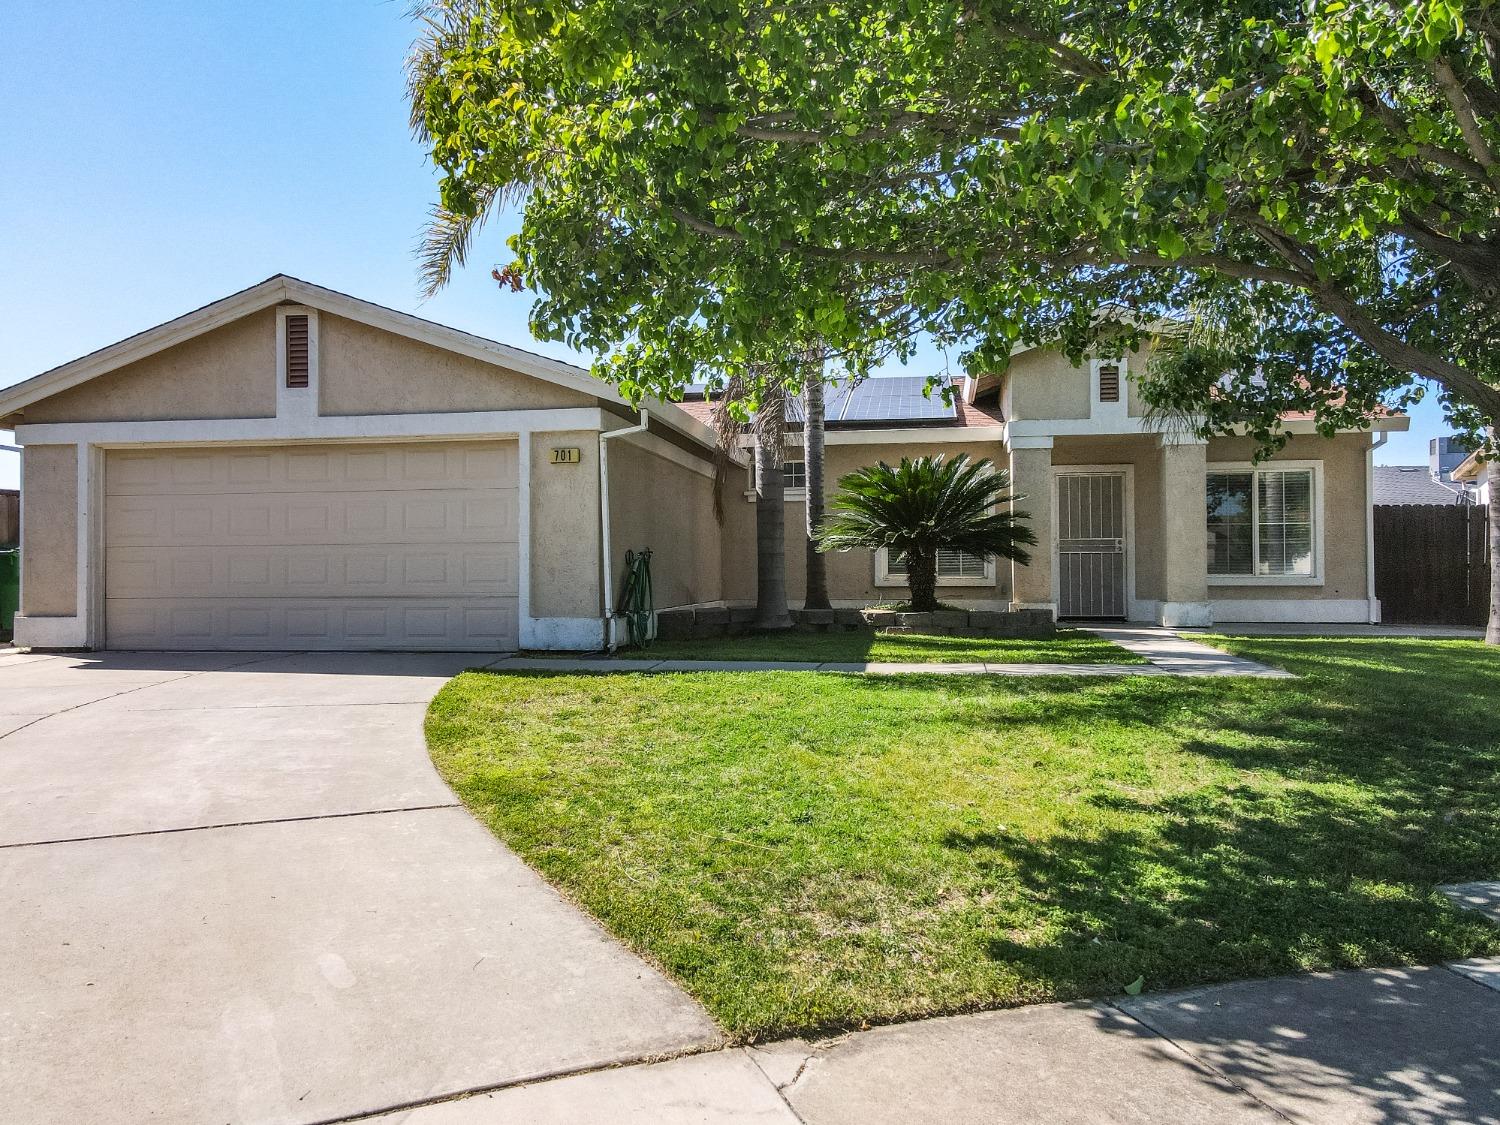 Photo of 701 Palmer Pl in Atwater, CA